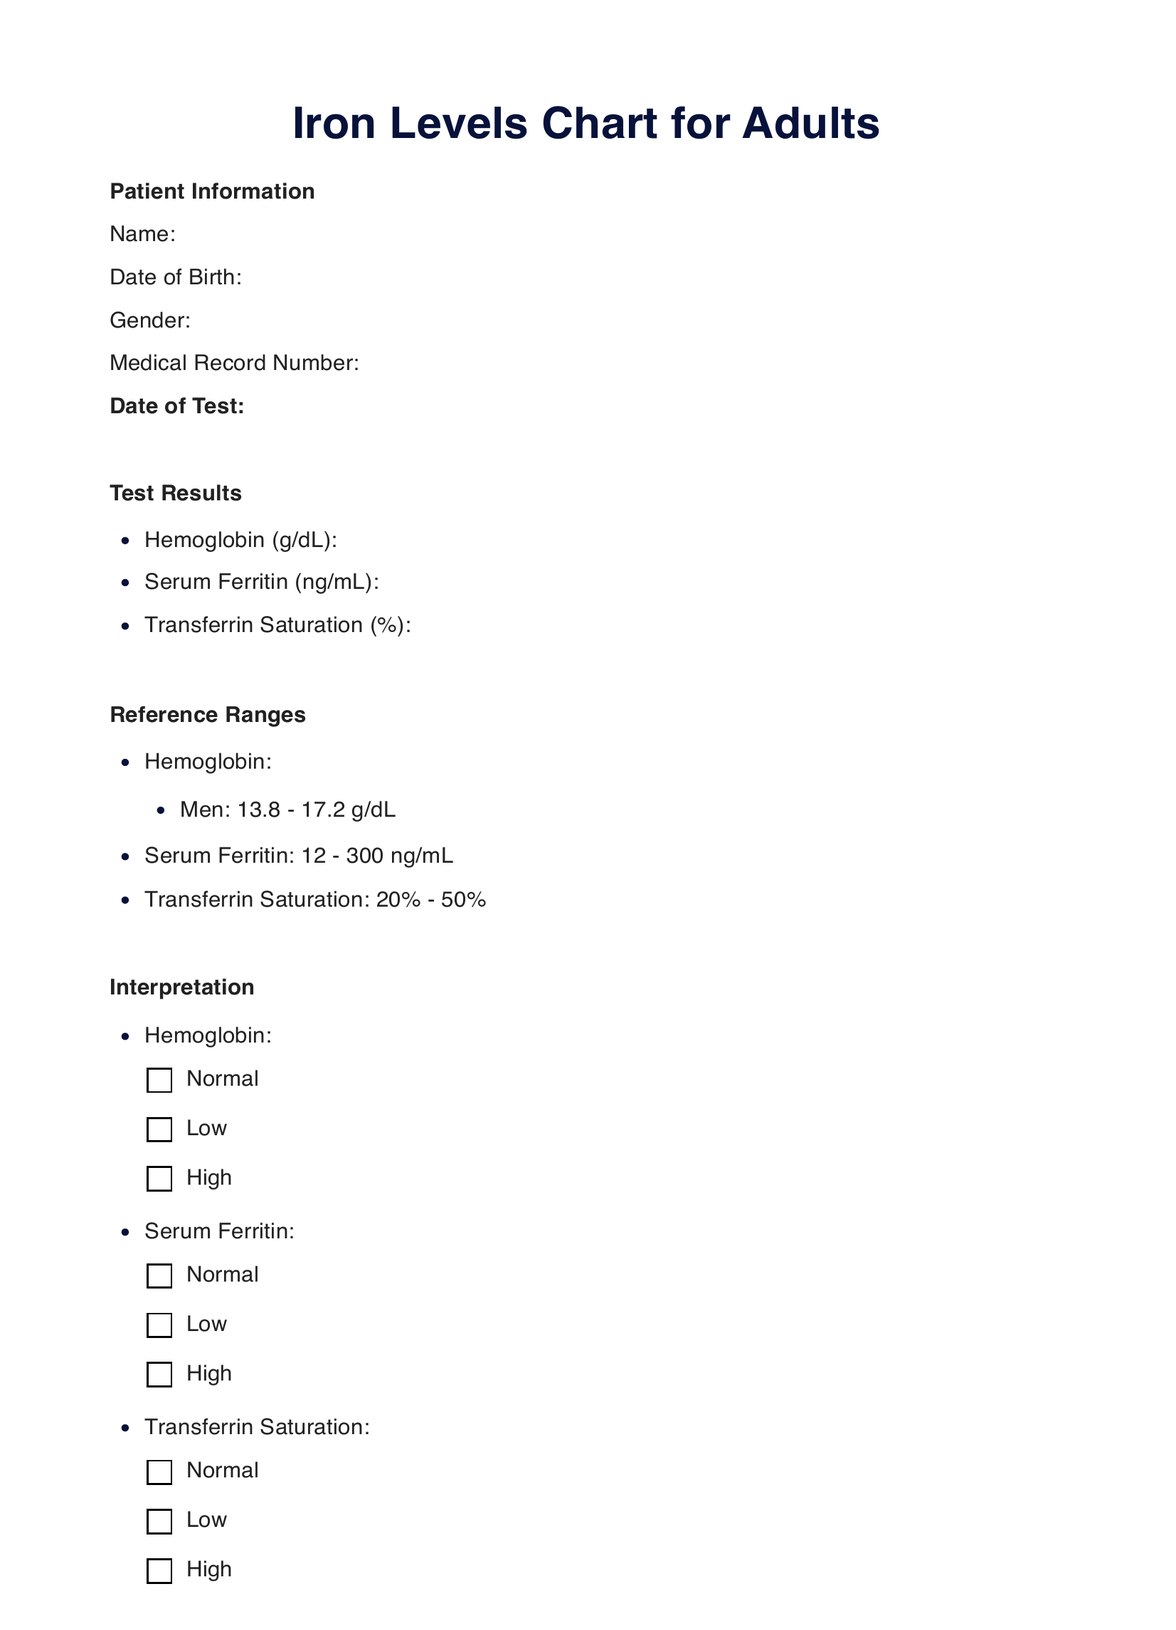 Iron Levels Chart For Adults PDF Example